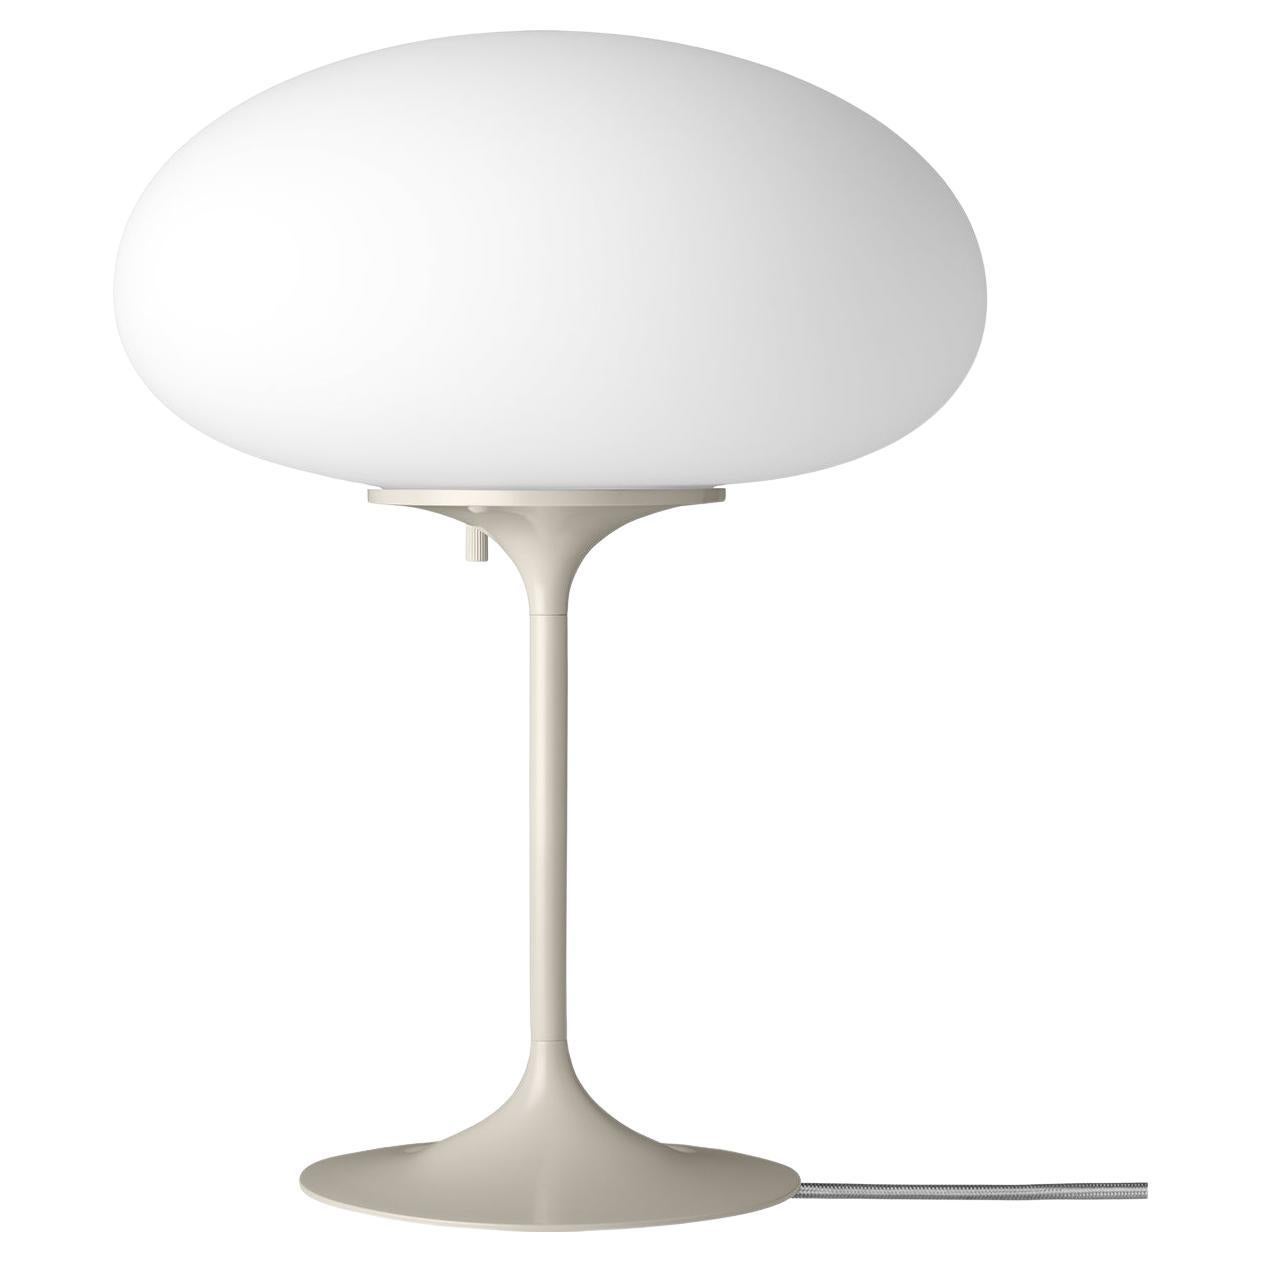 Stemlite Table Lamp, Frosted Glass, Pebble Grey For Sale